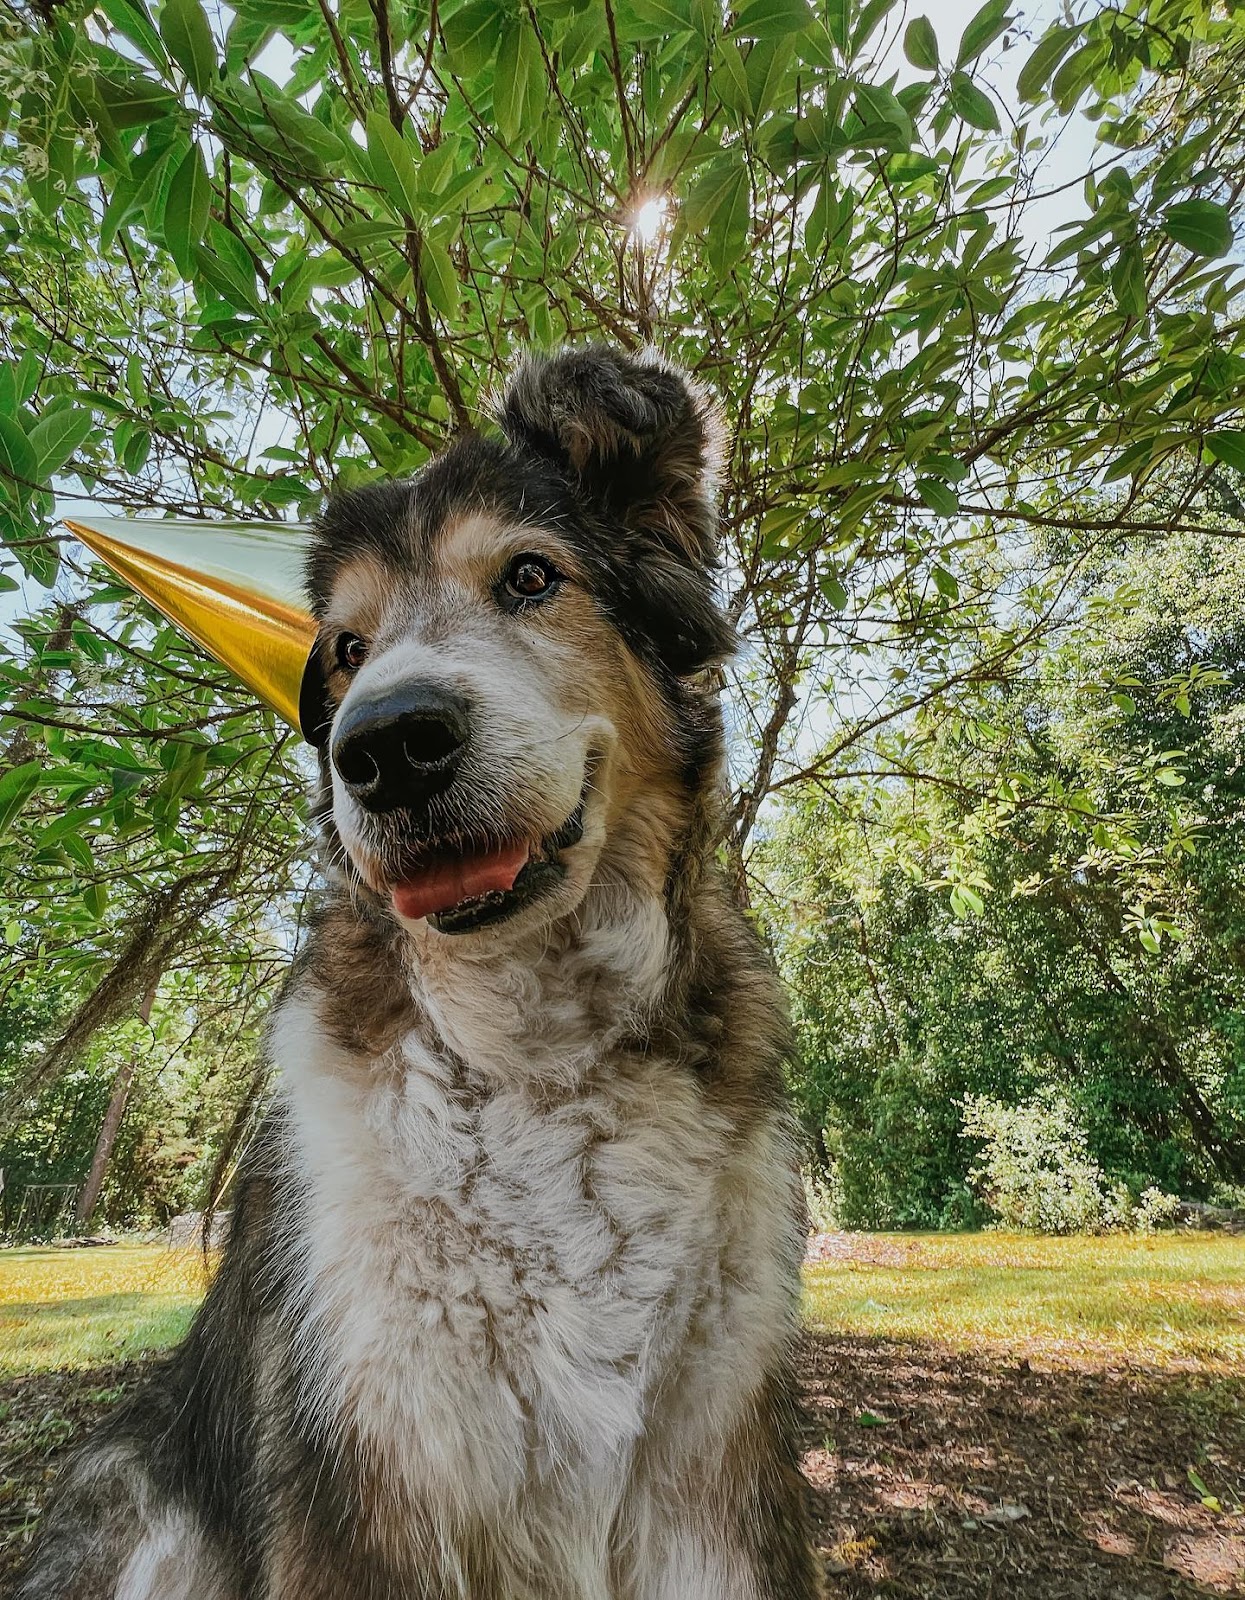 Dog That Has Almost 10 Million Followers On Instagram - Moose the Senior Dog